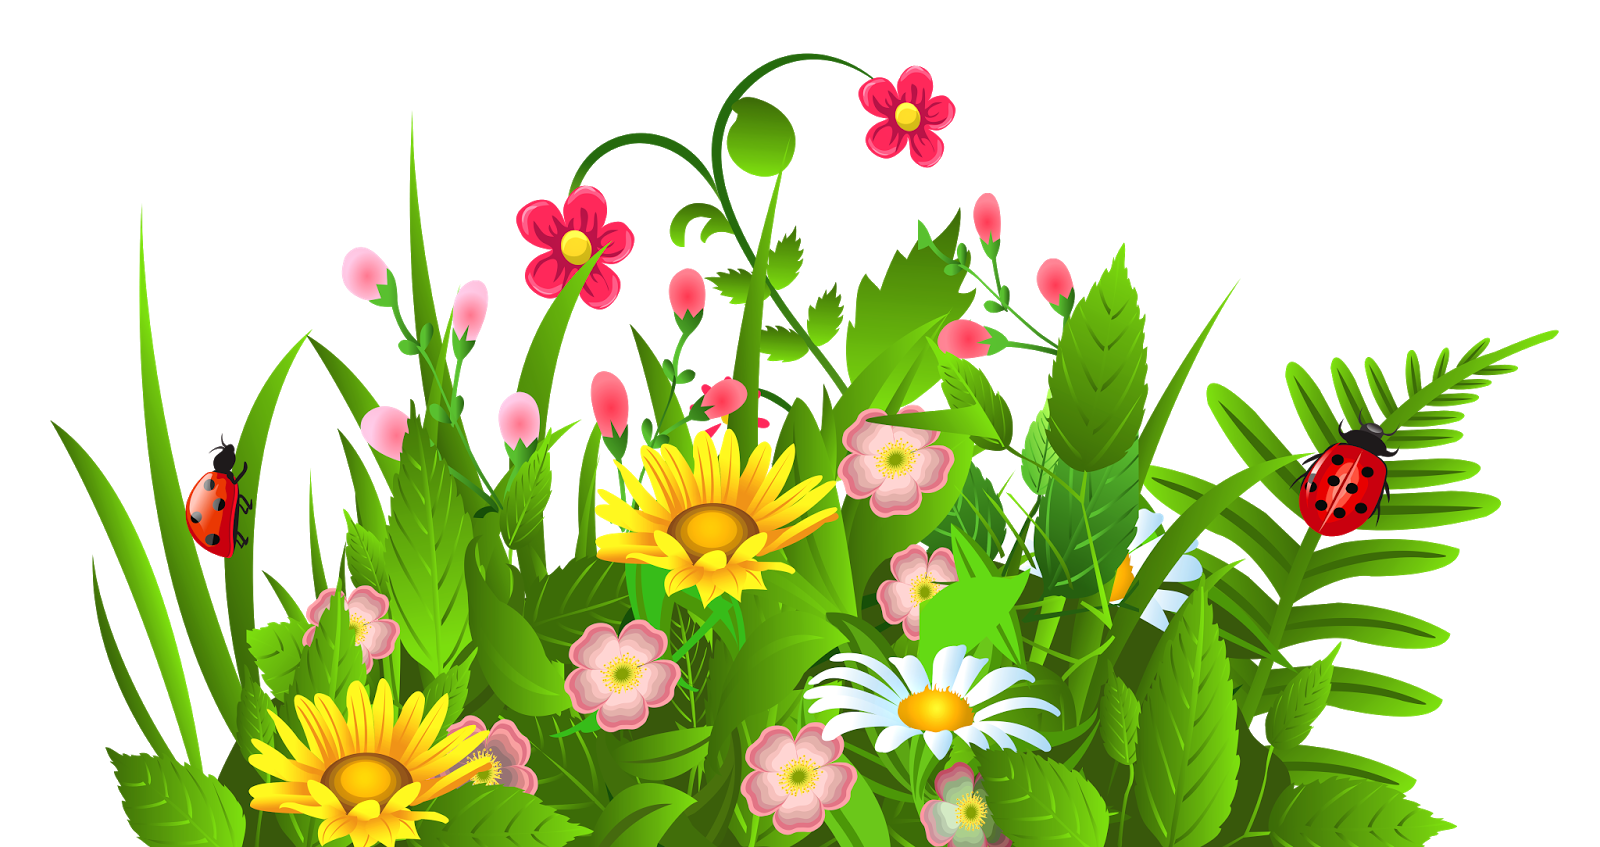 outdoors clipart divider